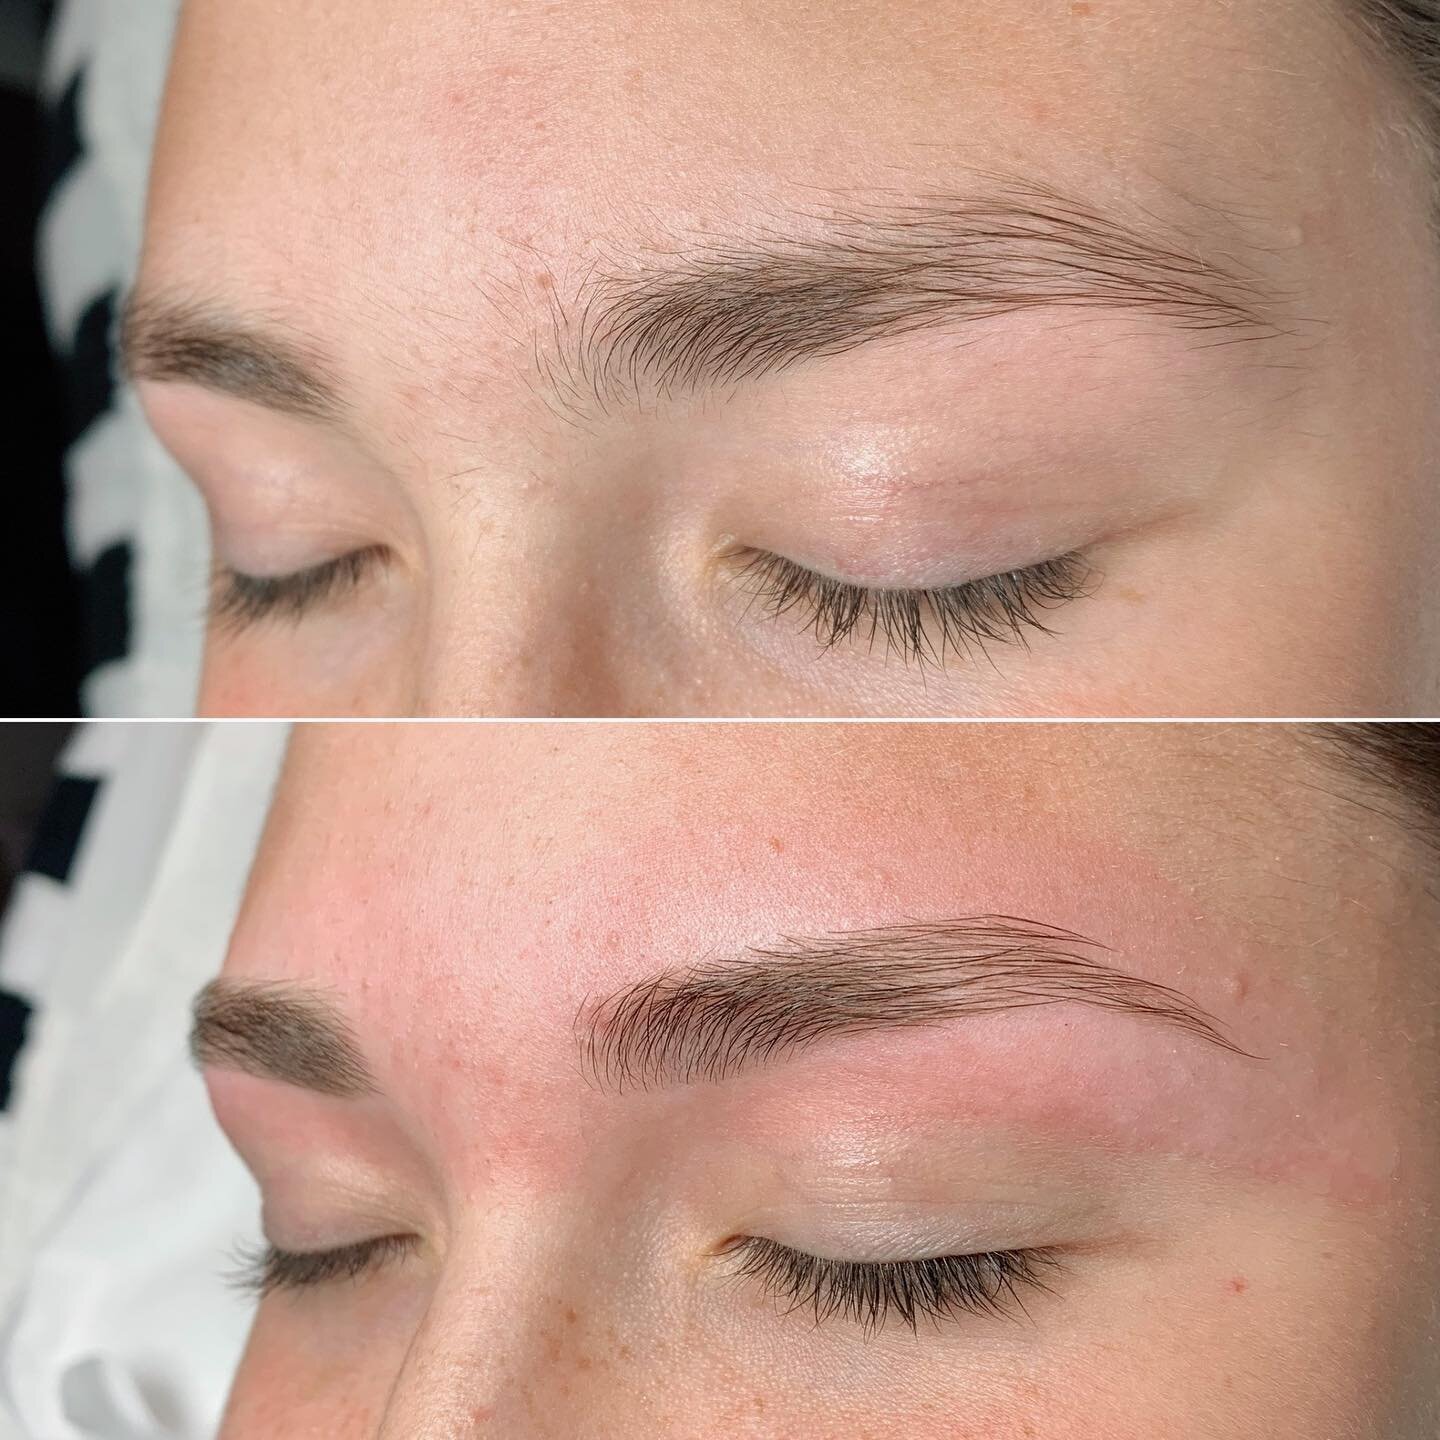 Brows could be the the best or worst accessory to your face. Choose wisely! 😍 

First time clients receive a complimentary eyebrow design by yours truly! Value of $19.